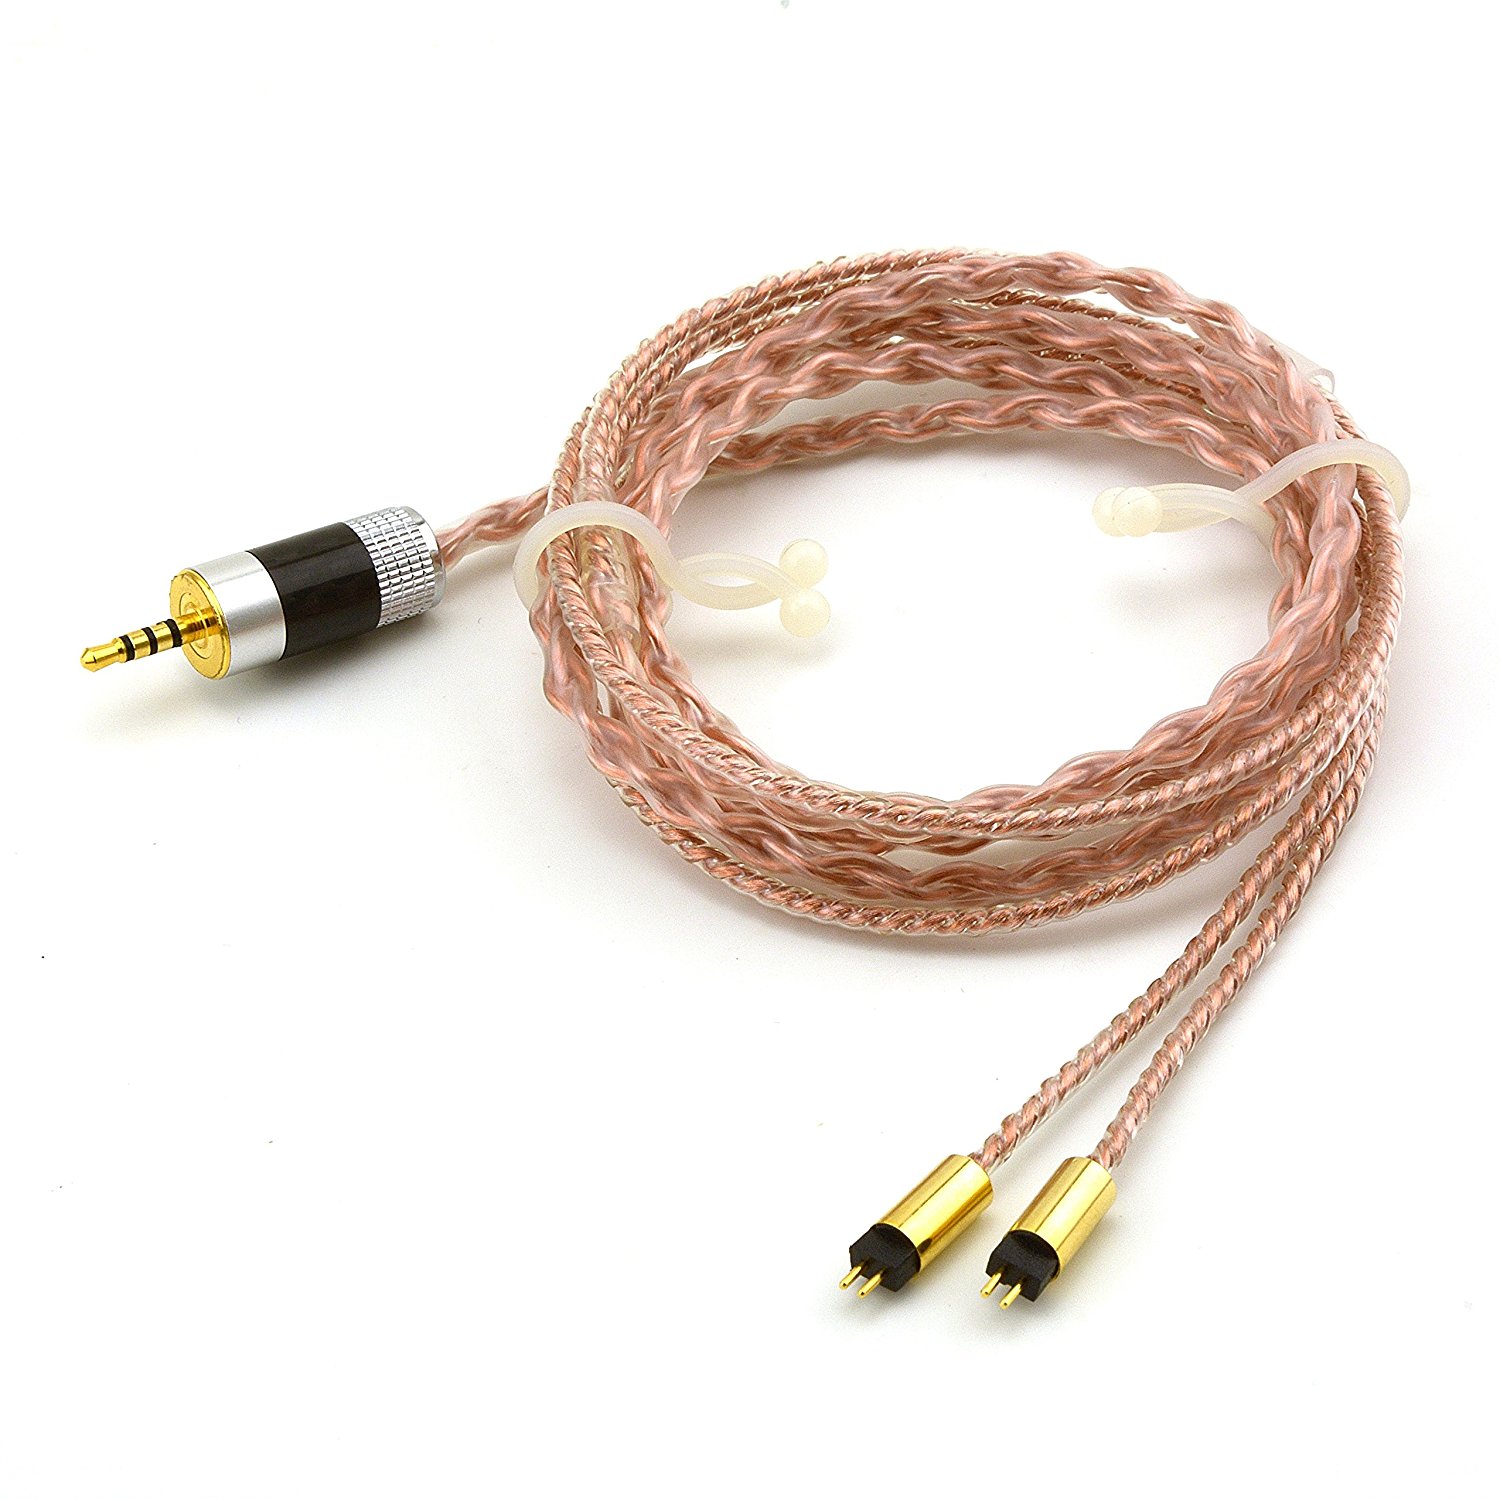 Cable Oriolus W-02